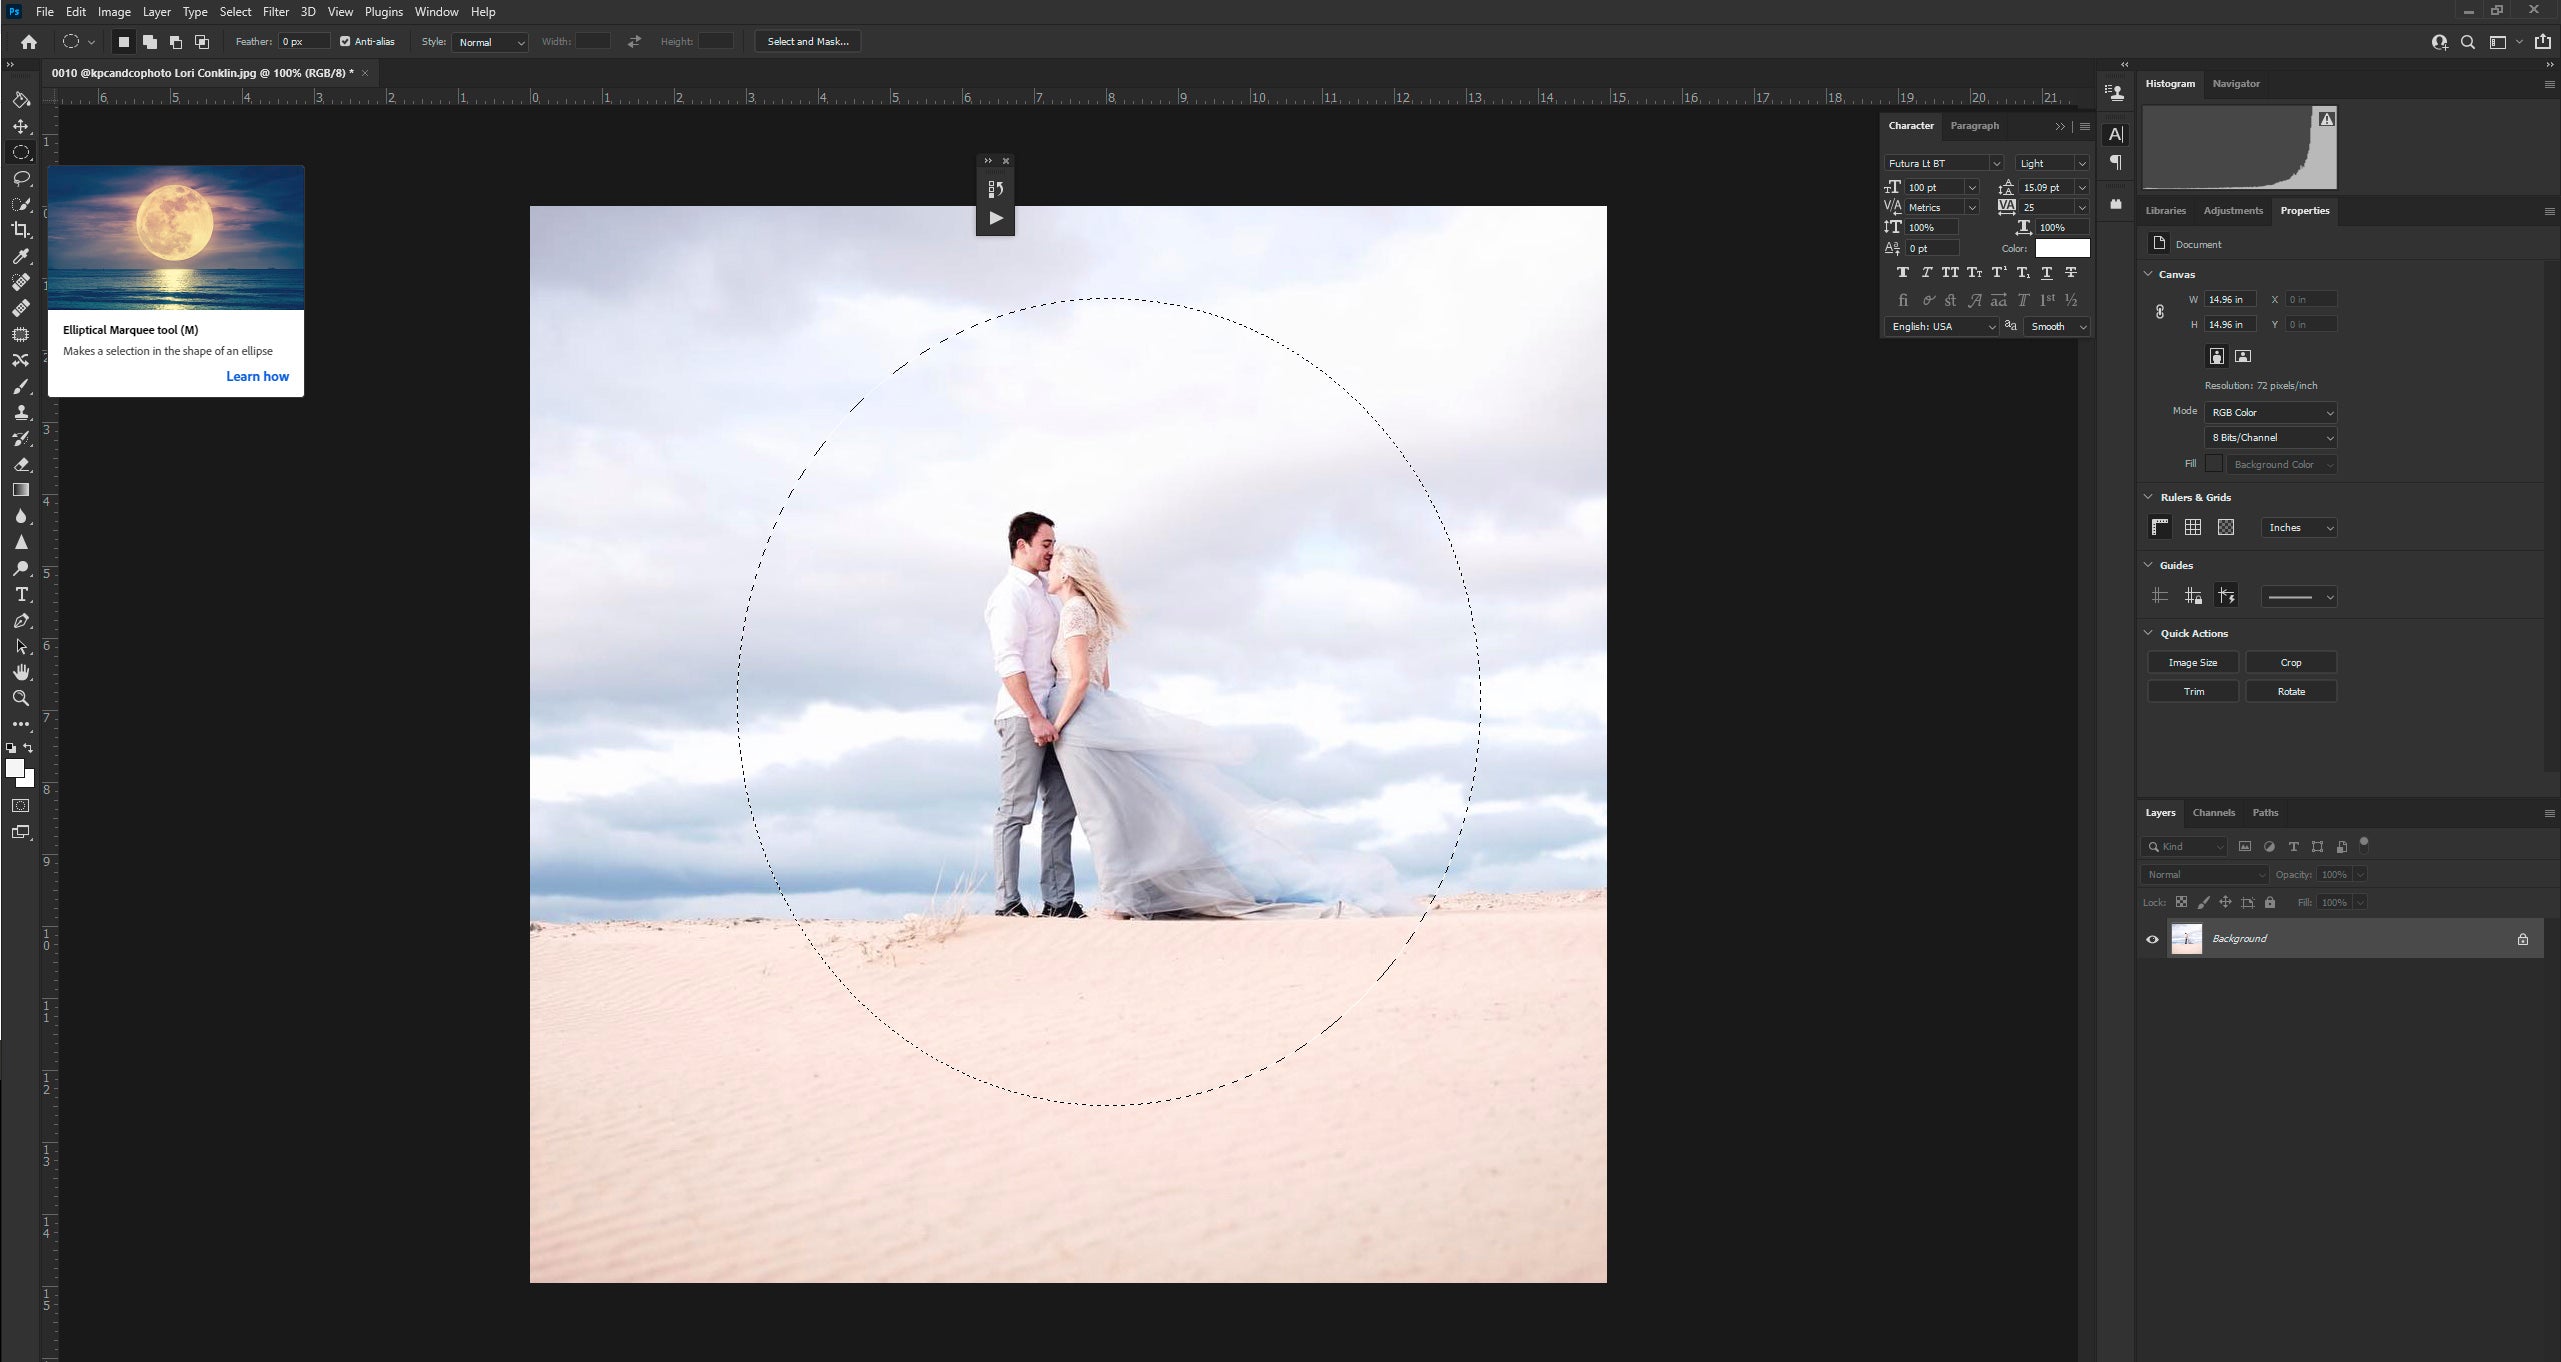 Making selection through elliptical marquee tool in Photoshop